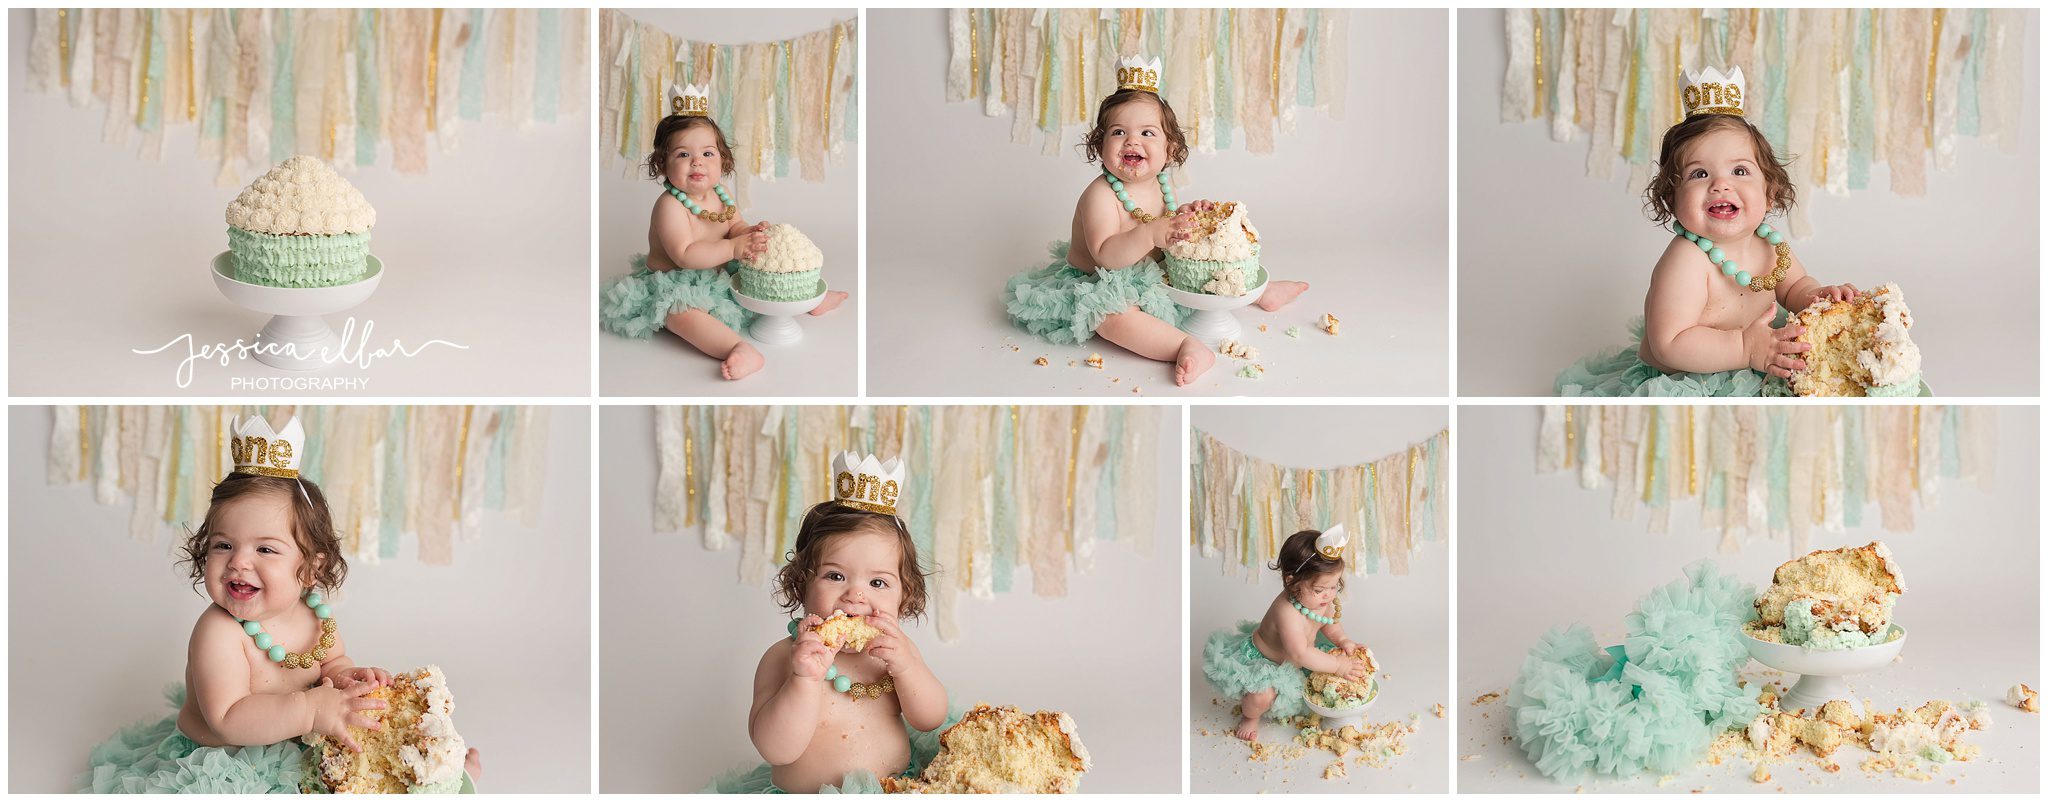 Forest Hills, Queens Cake Smash Photographer